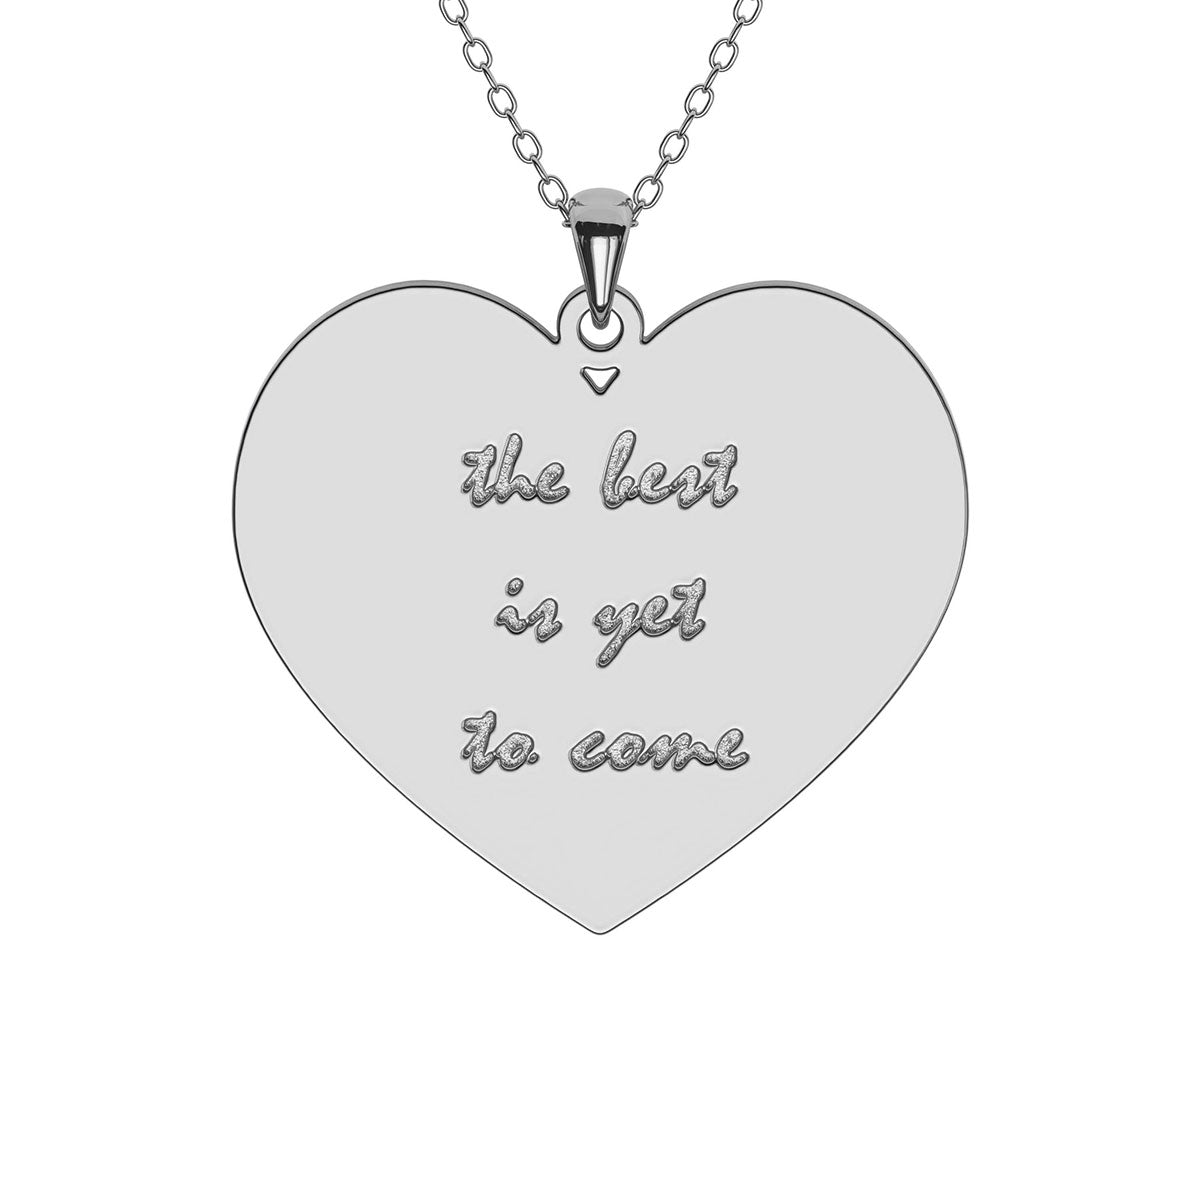 Personalized Heart Necklace with Engraving